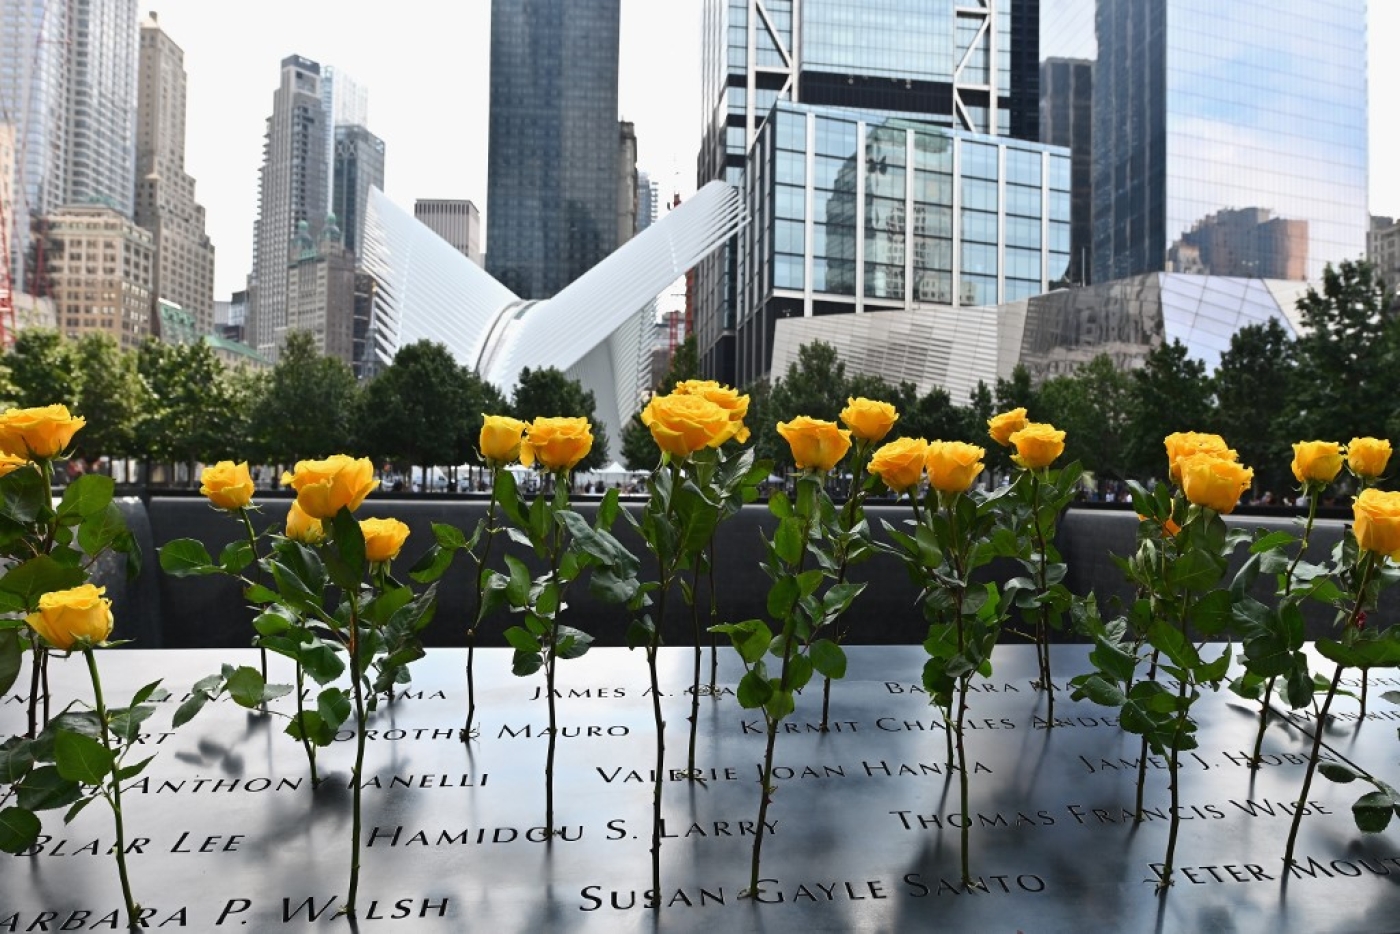 Flowers placed at the 9/11 Memorial & Museum in New York on 11 September 2020